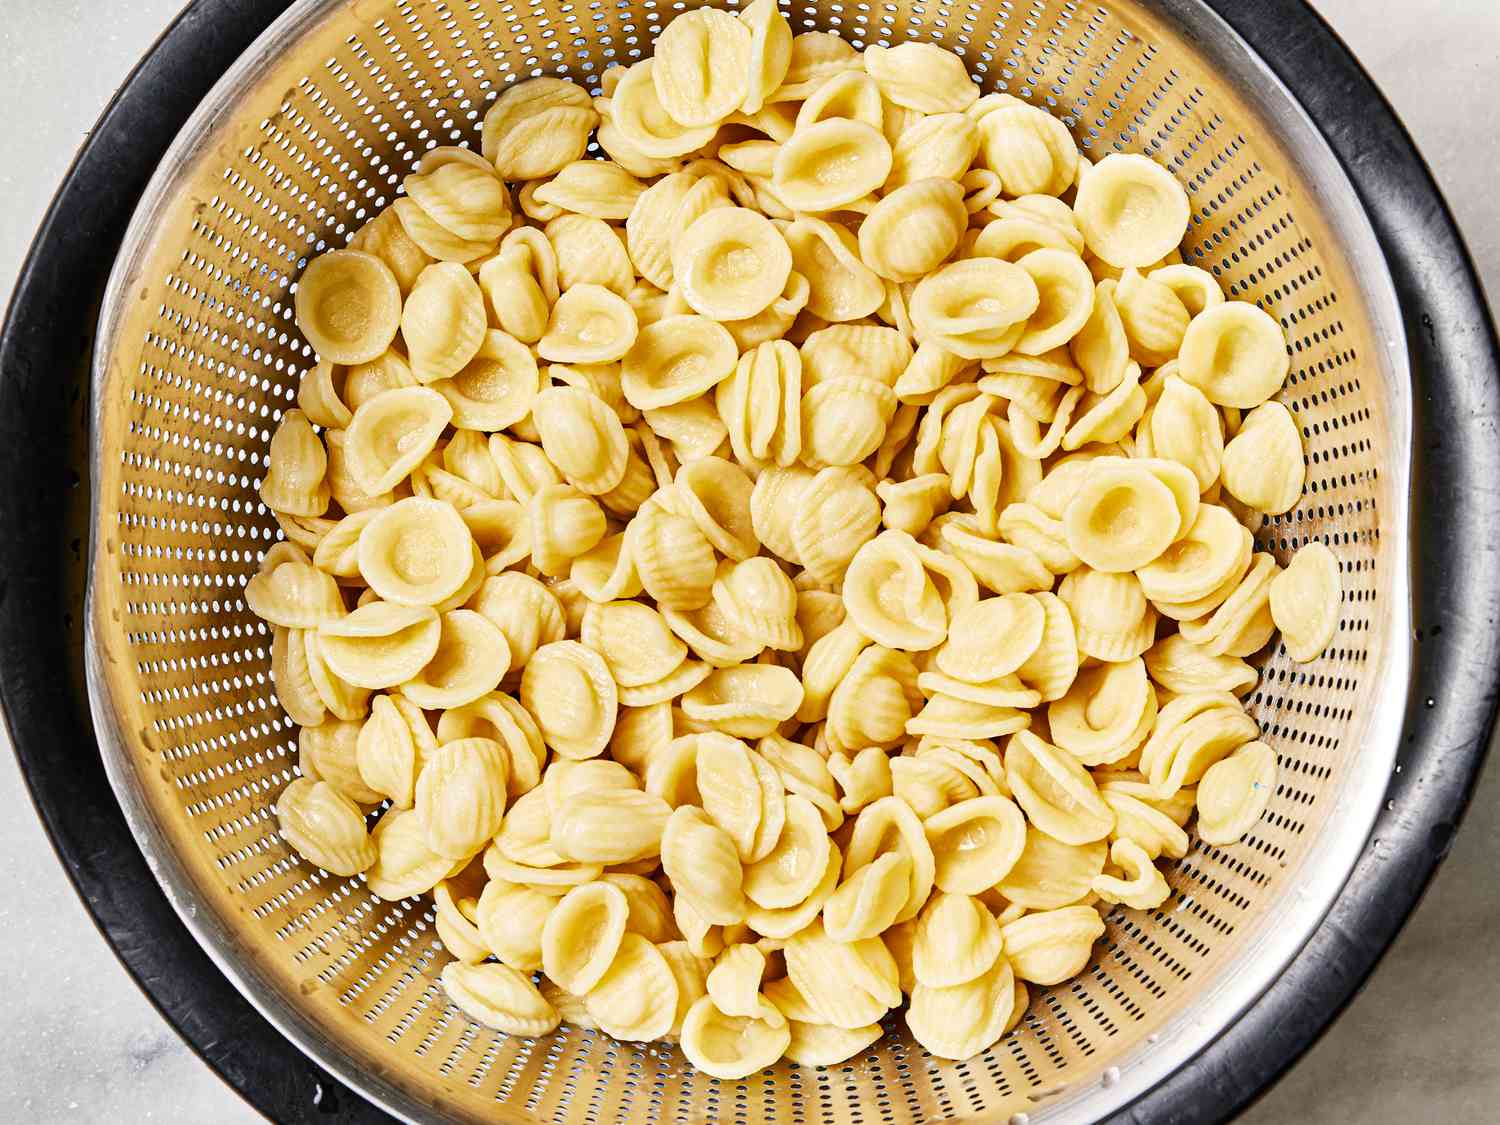 Overhead view of pasta in a collander